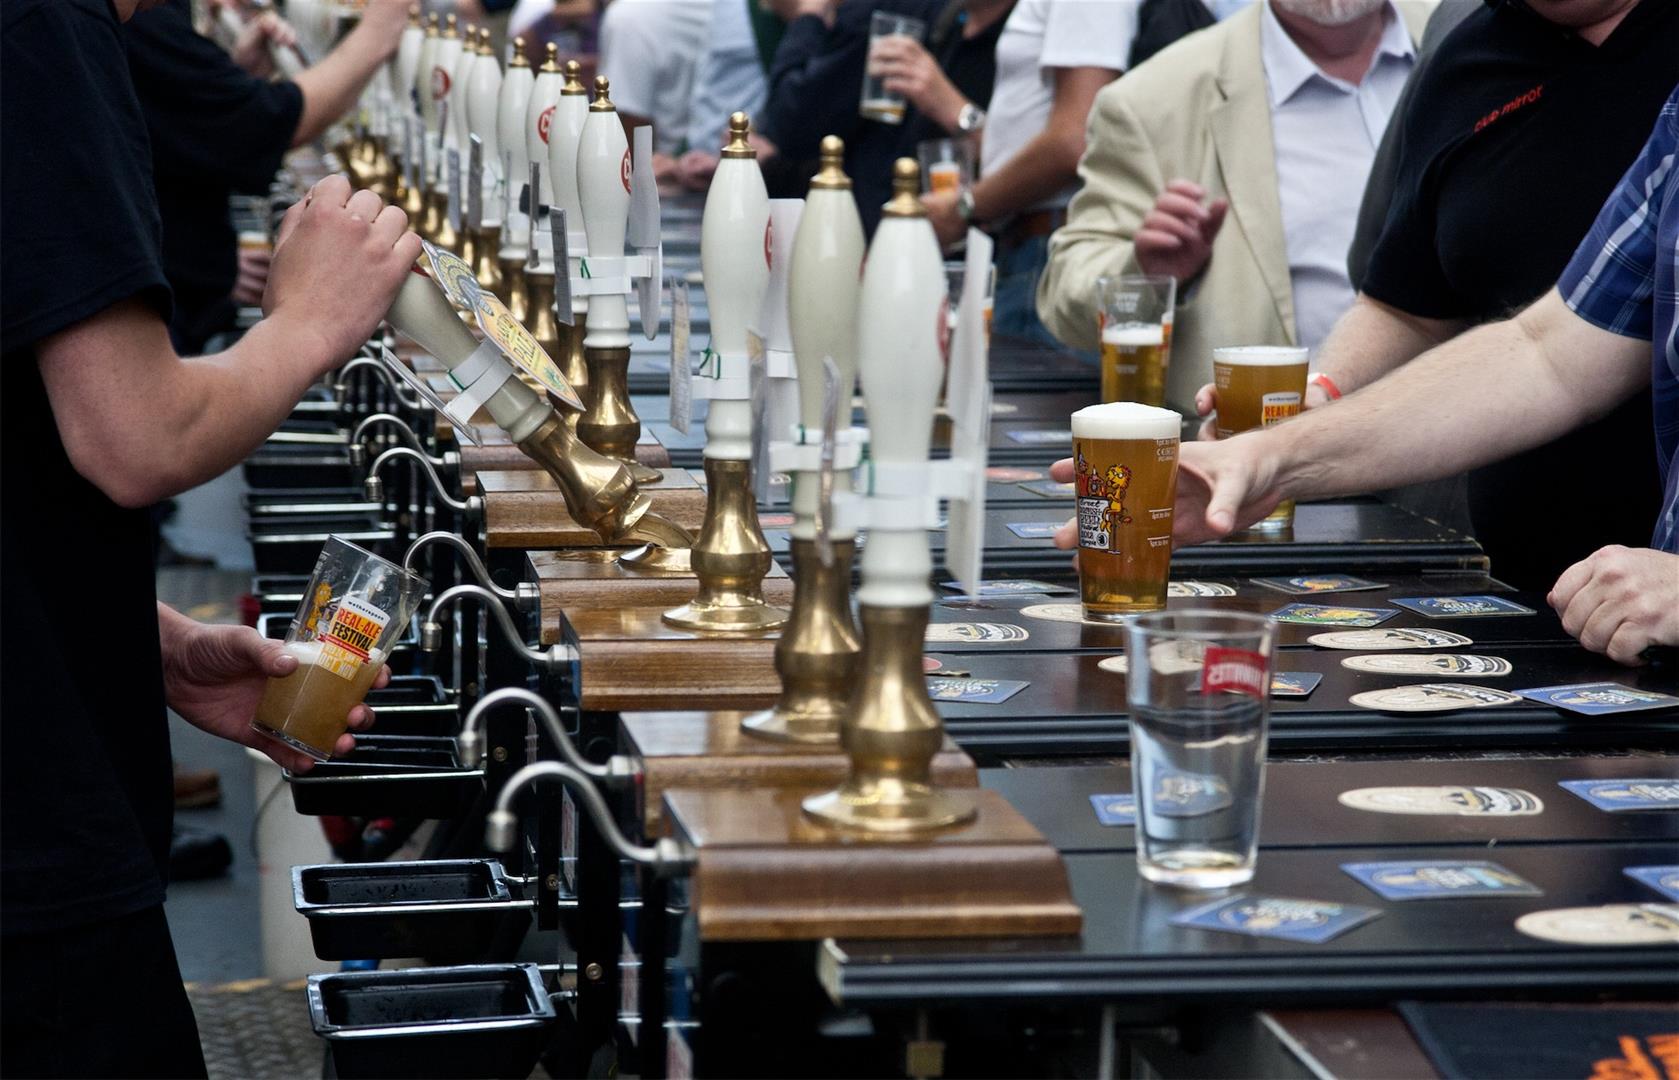 The Real Ale Connoisseurs’ Guide to Great Boutique Beers